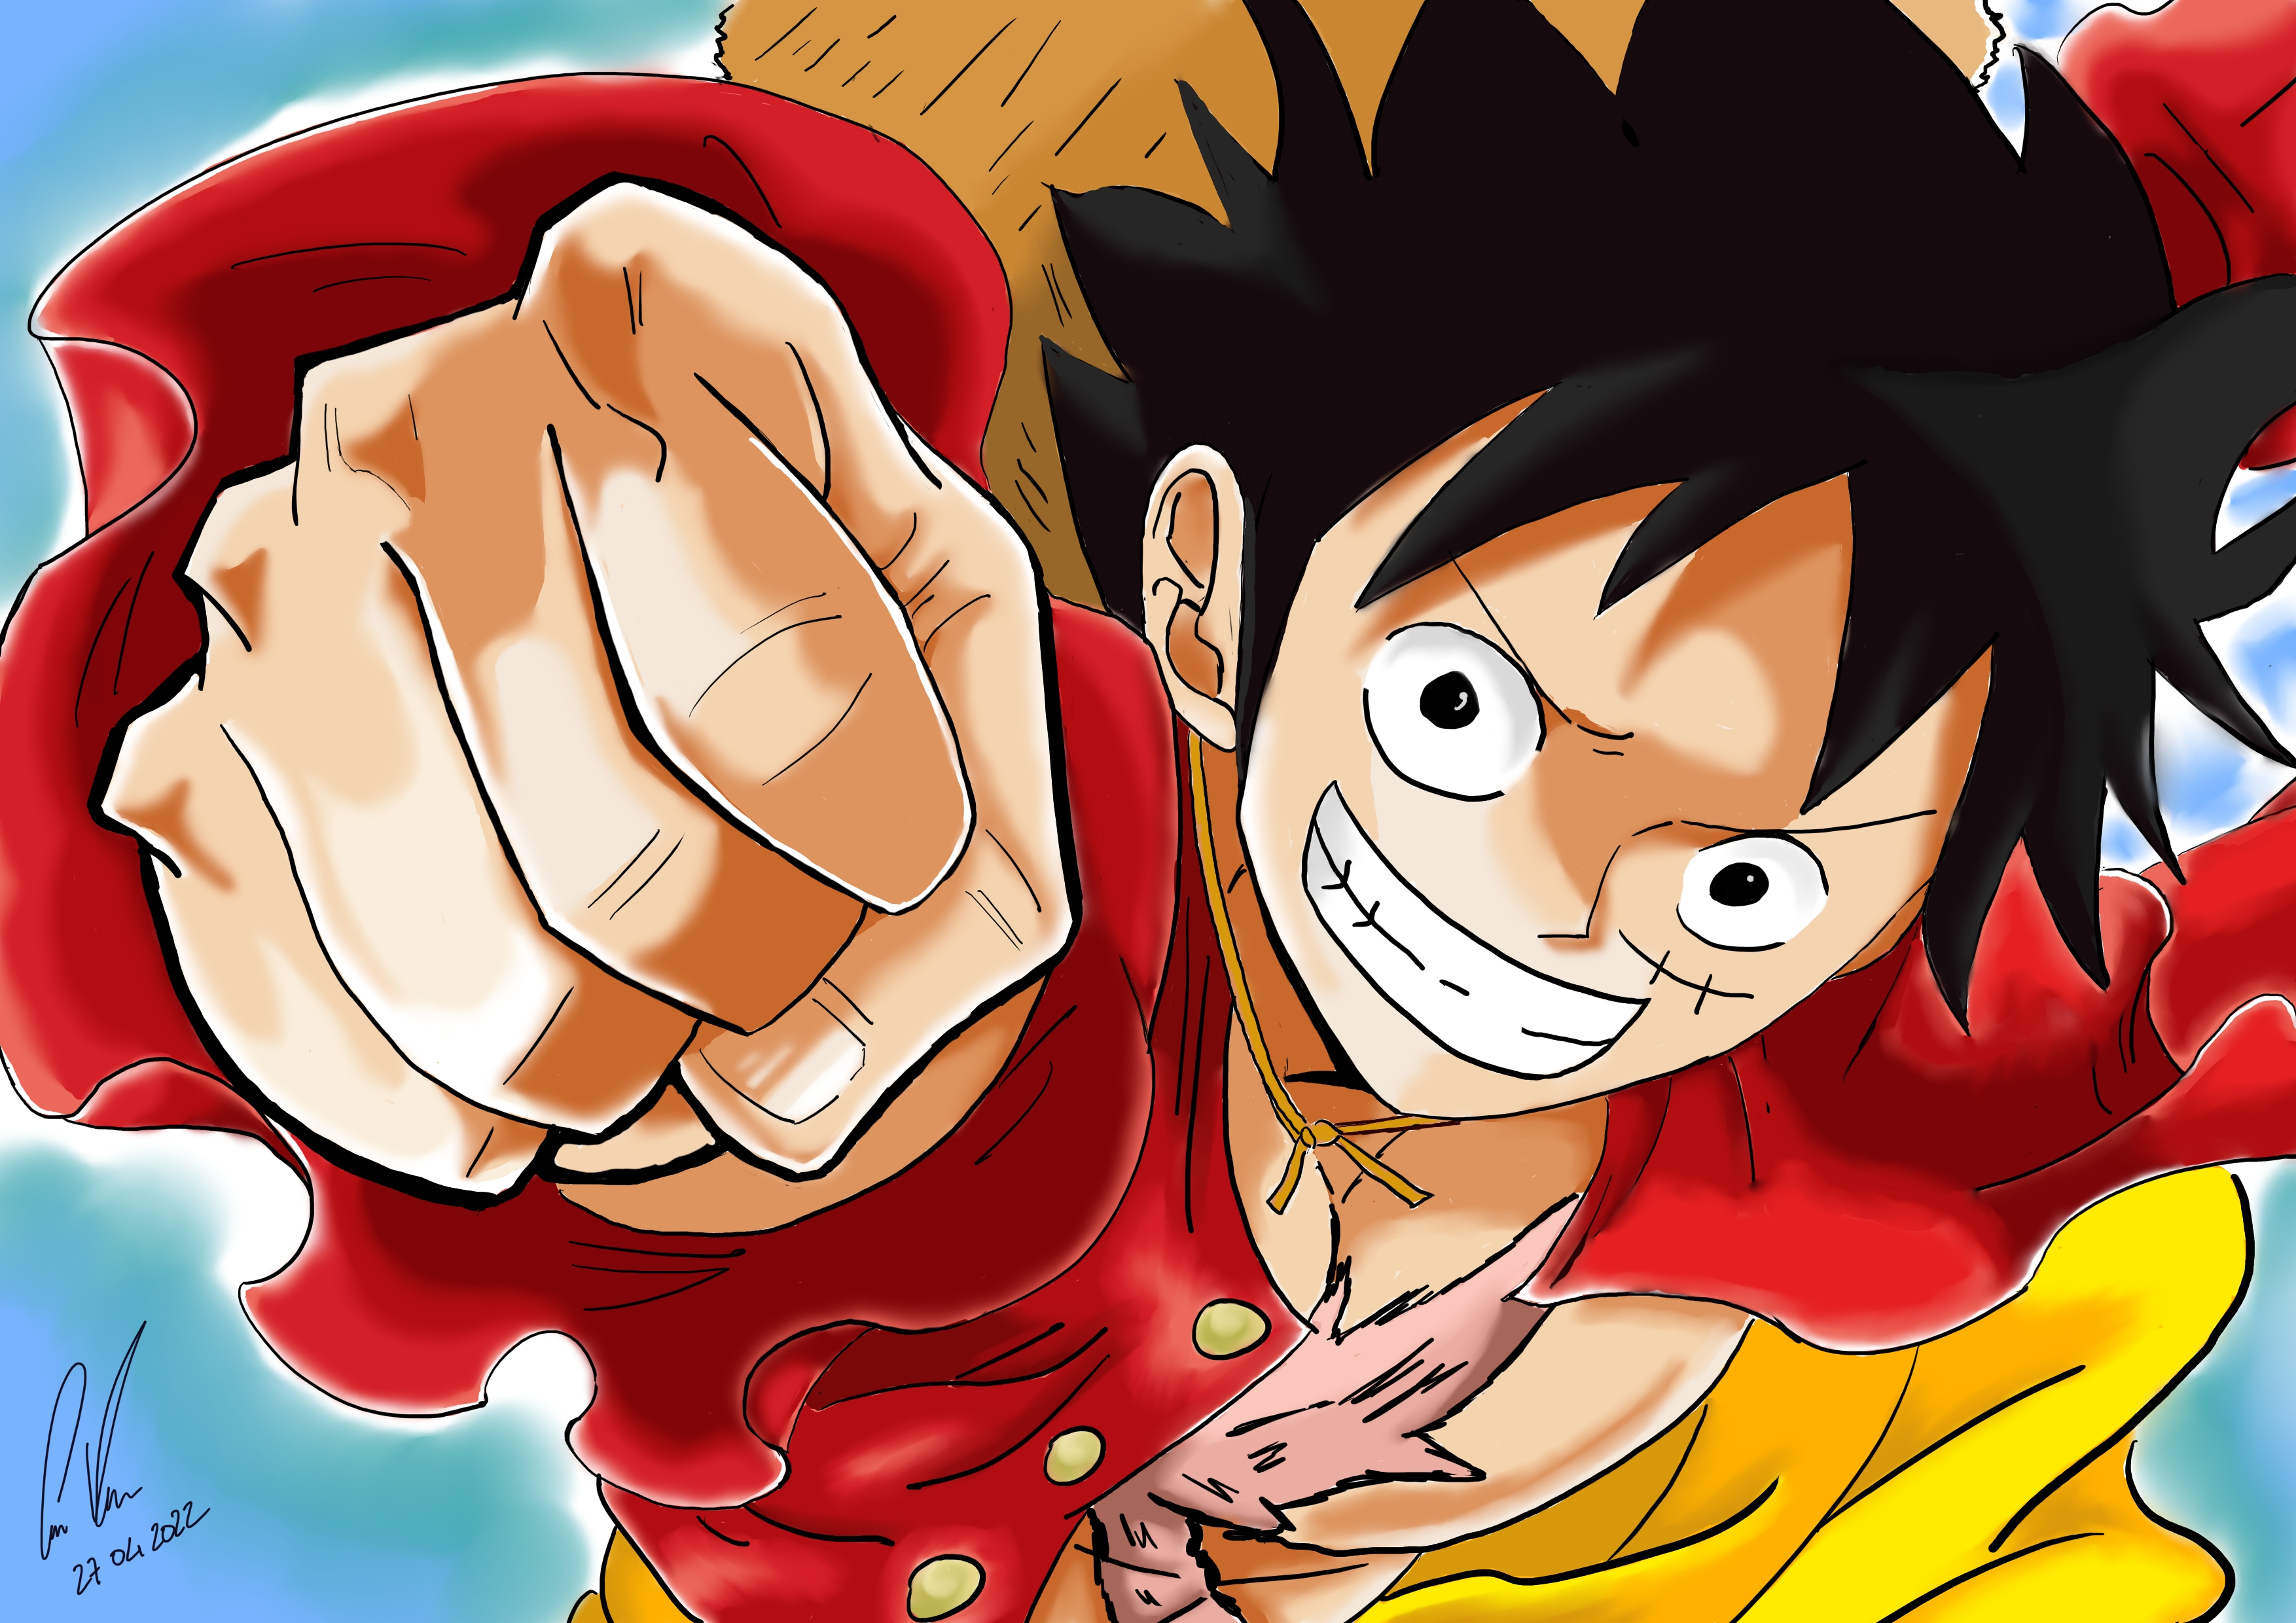 Anime One Piece HD Wallpaper by Trannith